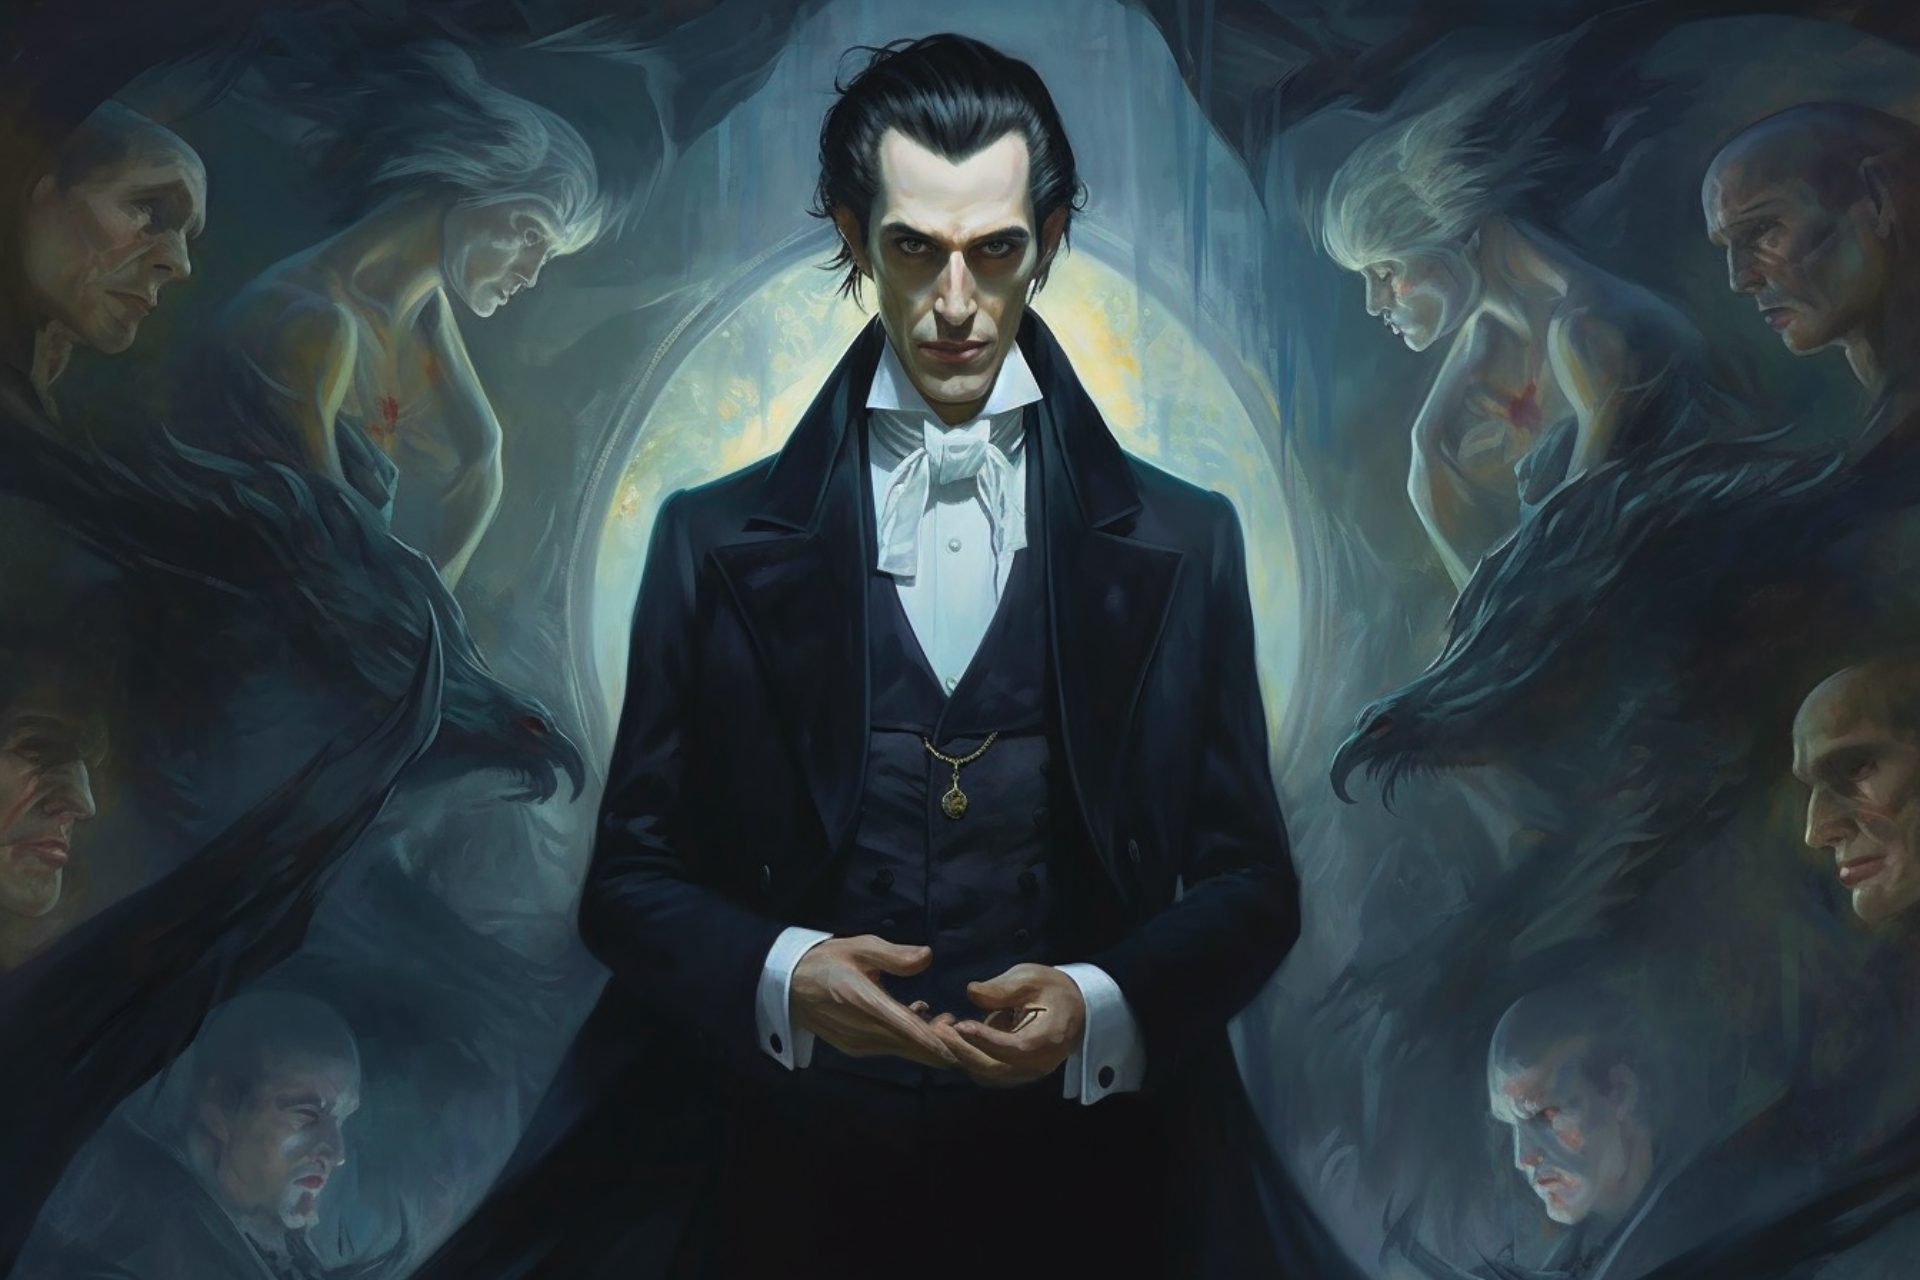 An illustration representing Count Dracula, wearing a white shirt and a back suit and cape. He is surrounded by male and female enthralled individuals.